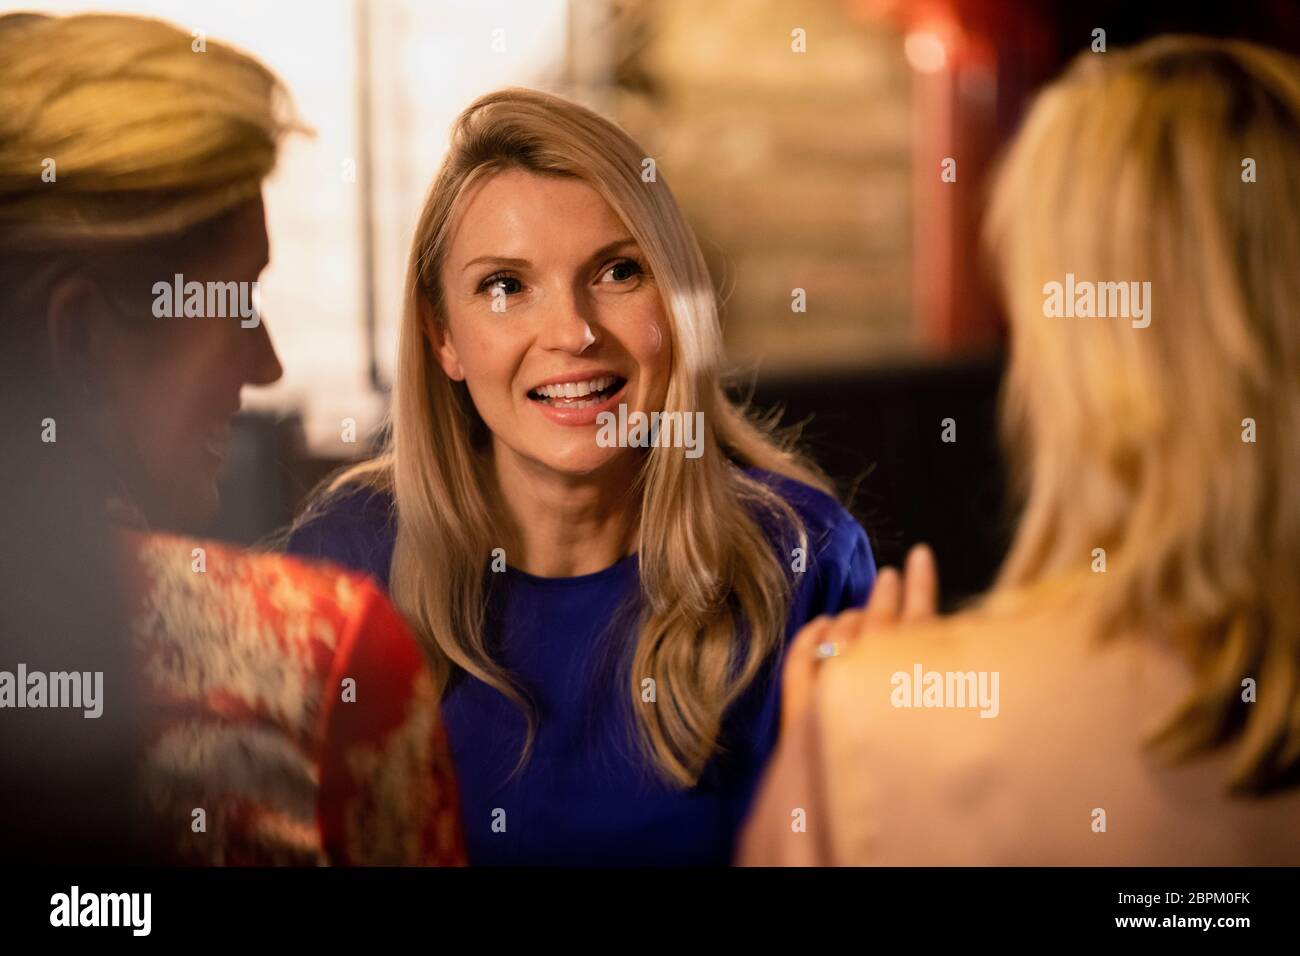 Over the shoulder view of a mature woman talking and smiling with her friends. Stock Photo